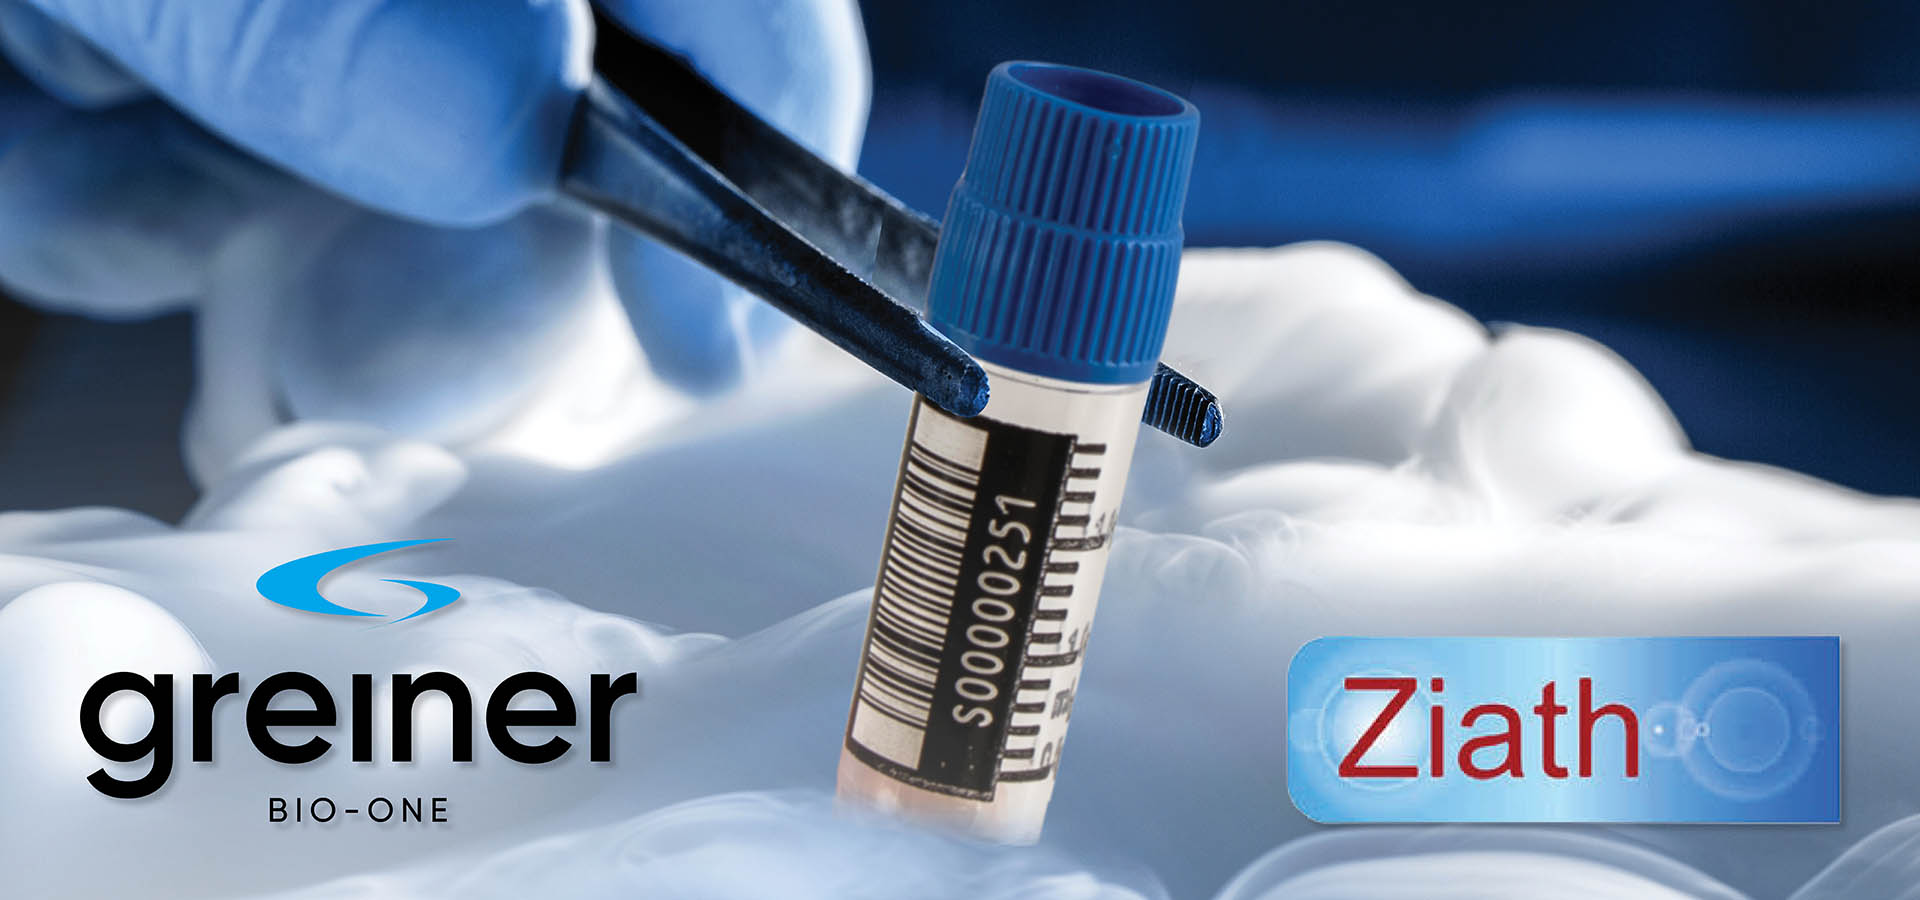 In Need of an Intelligent Sample Cryostorage Solution?